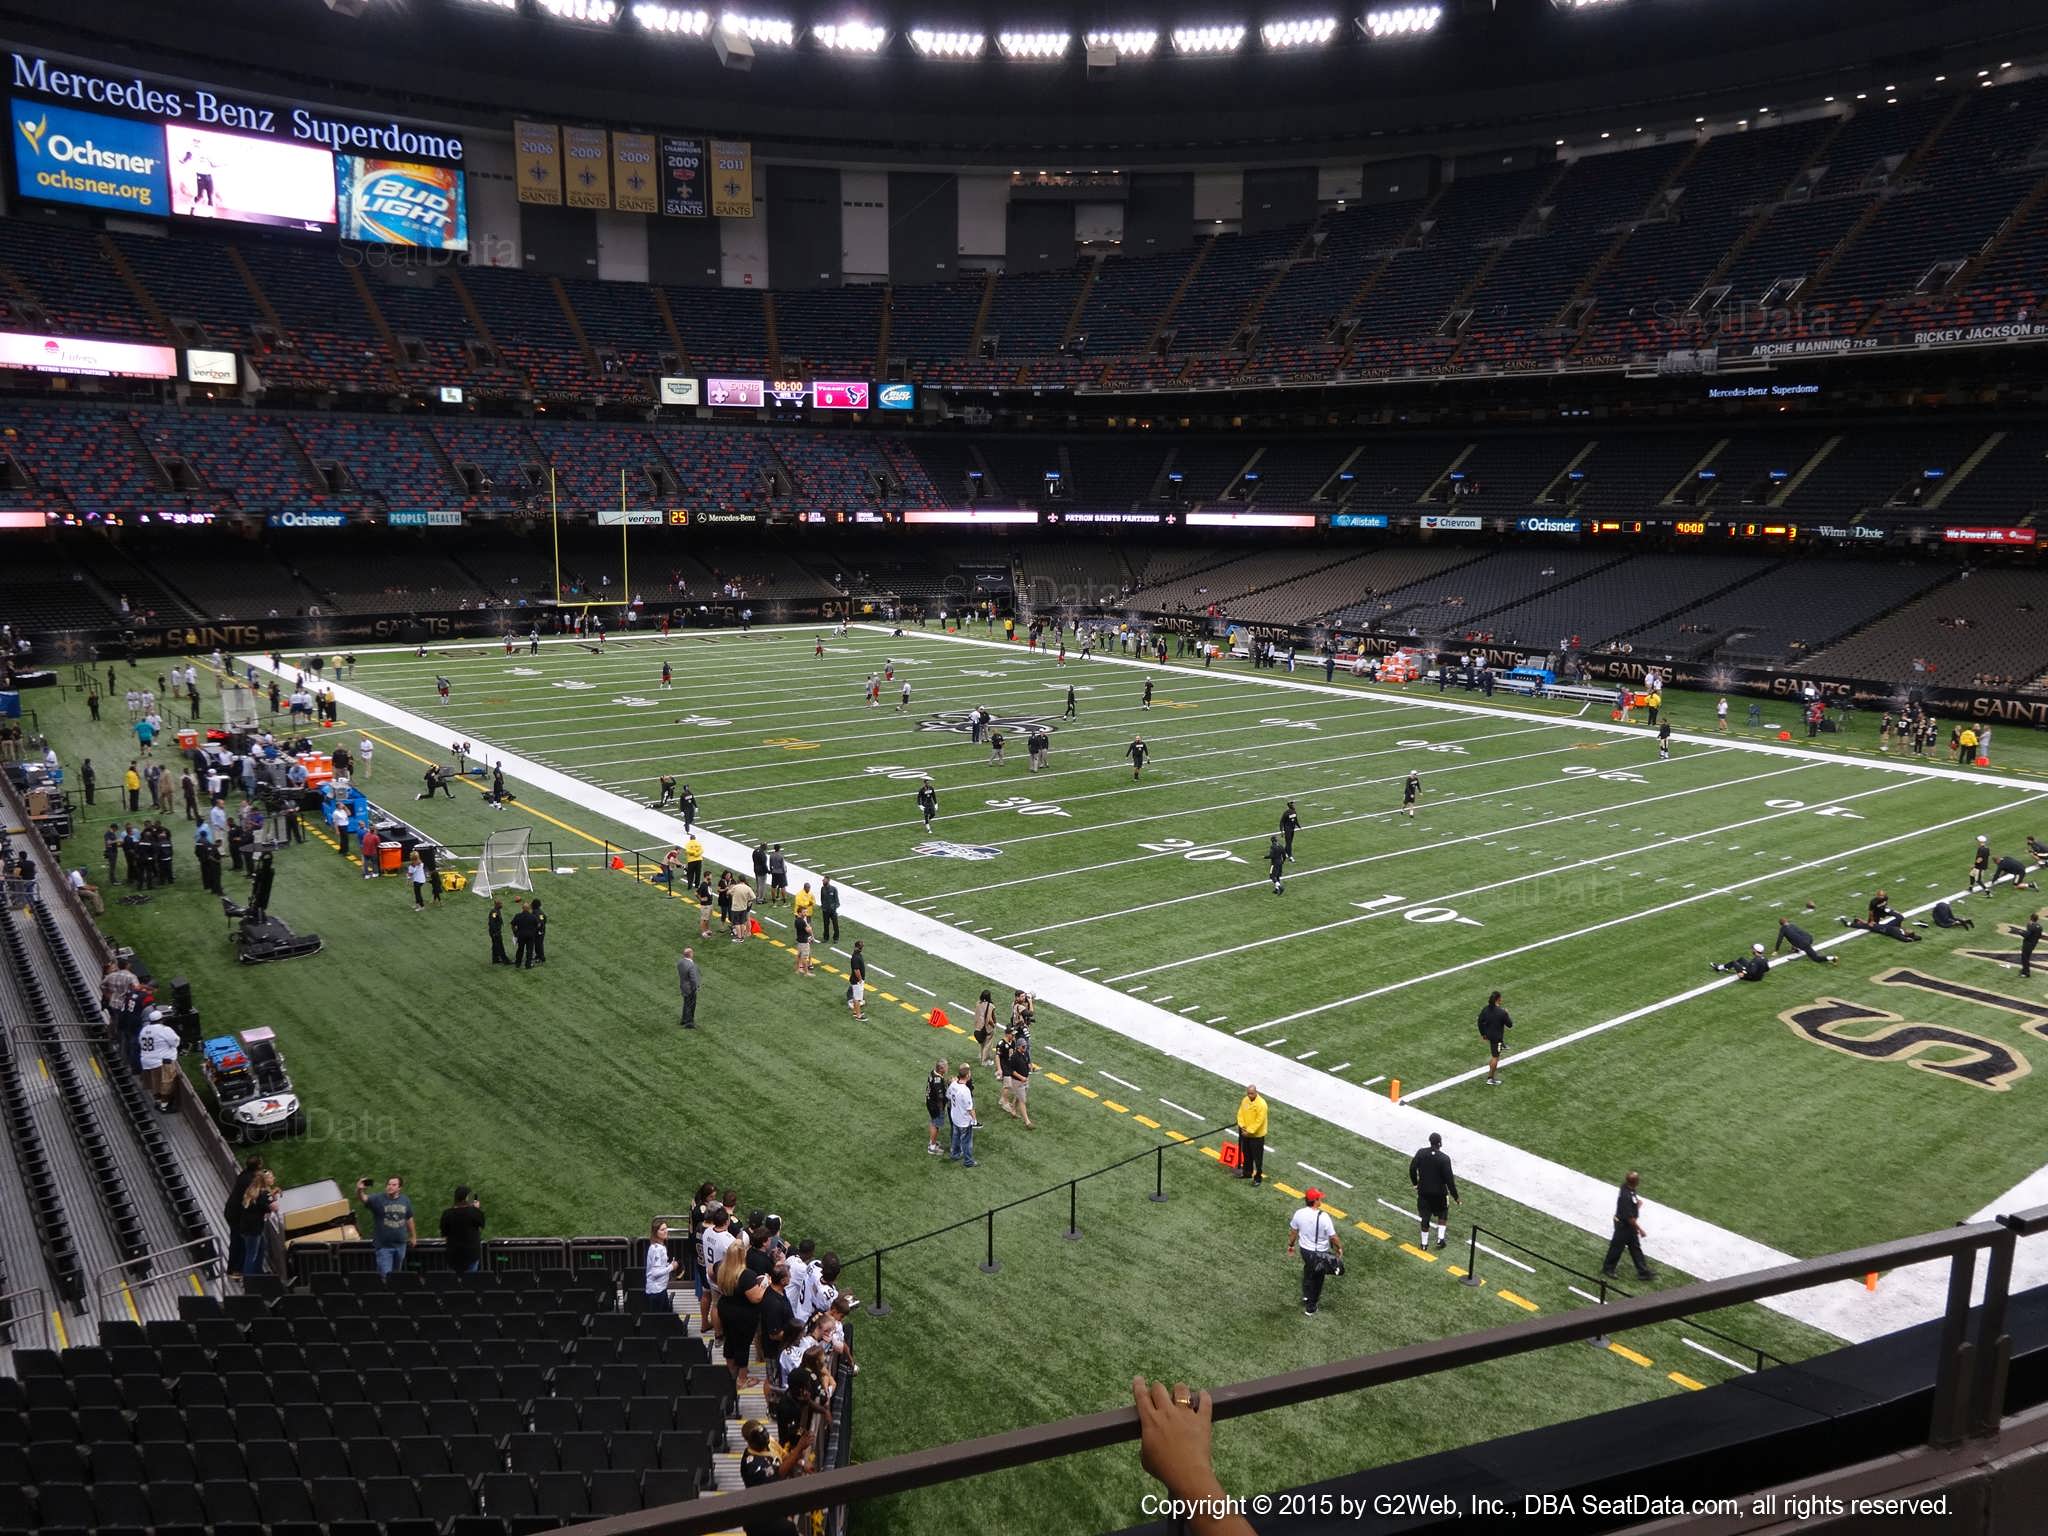 Seat view from section 251 at the Mercedes-Benz Superdome, home of the New Orleans Saints